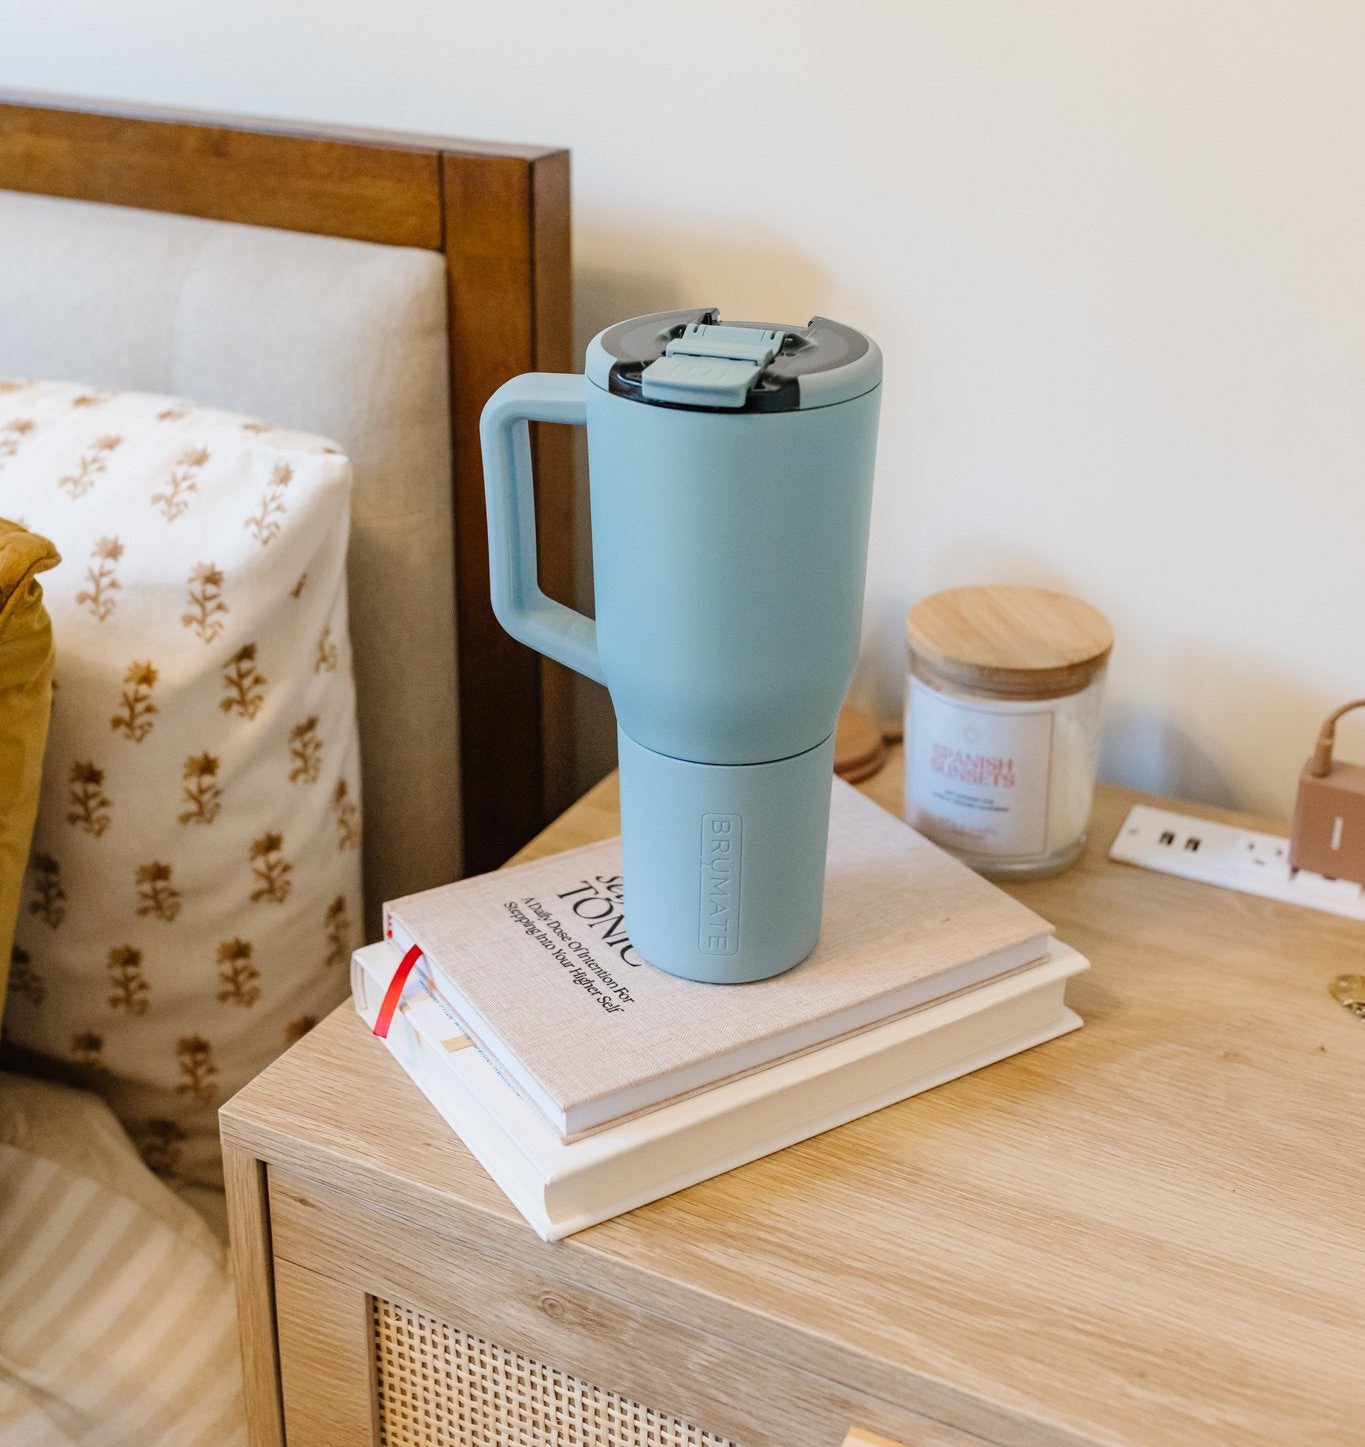 Insulated travel mug on books beside a bed, ideal for a cozy read or morning routine